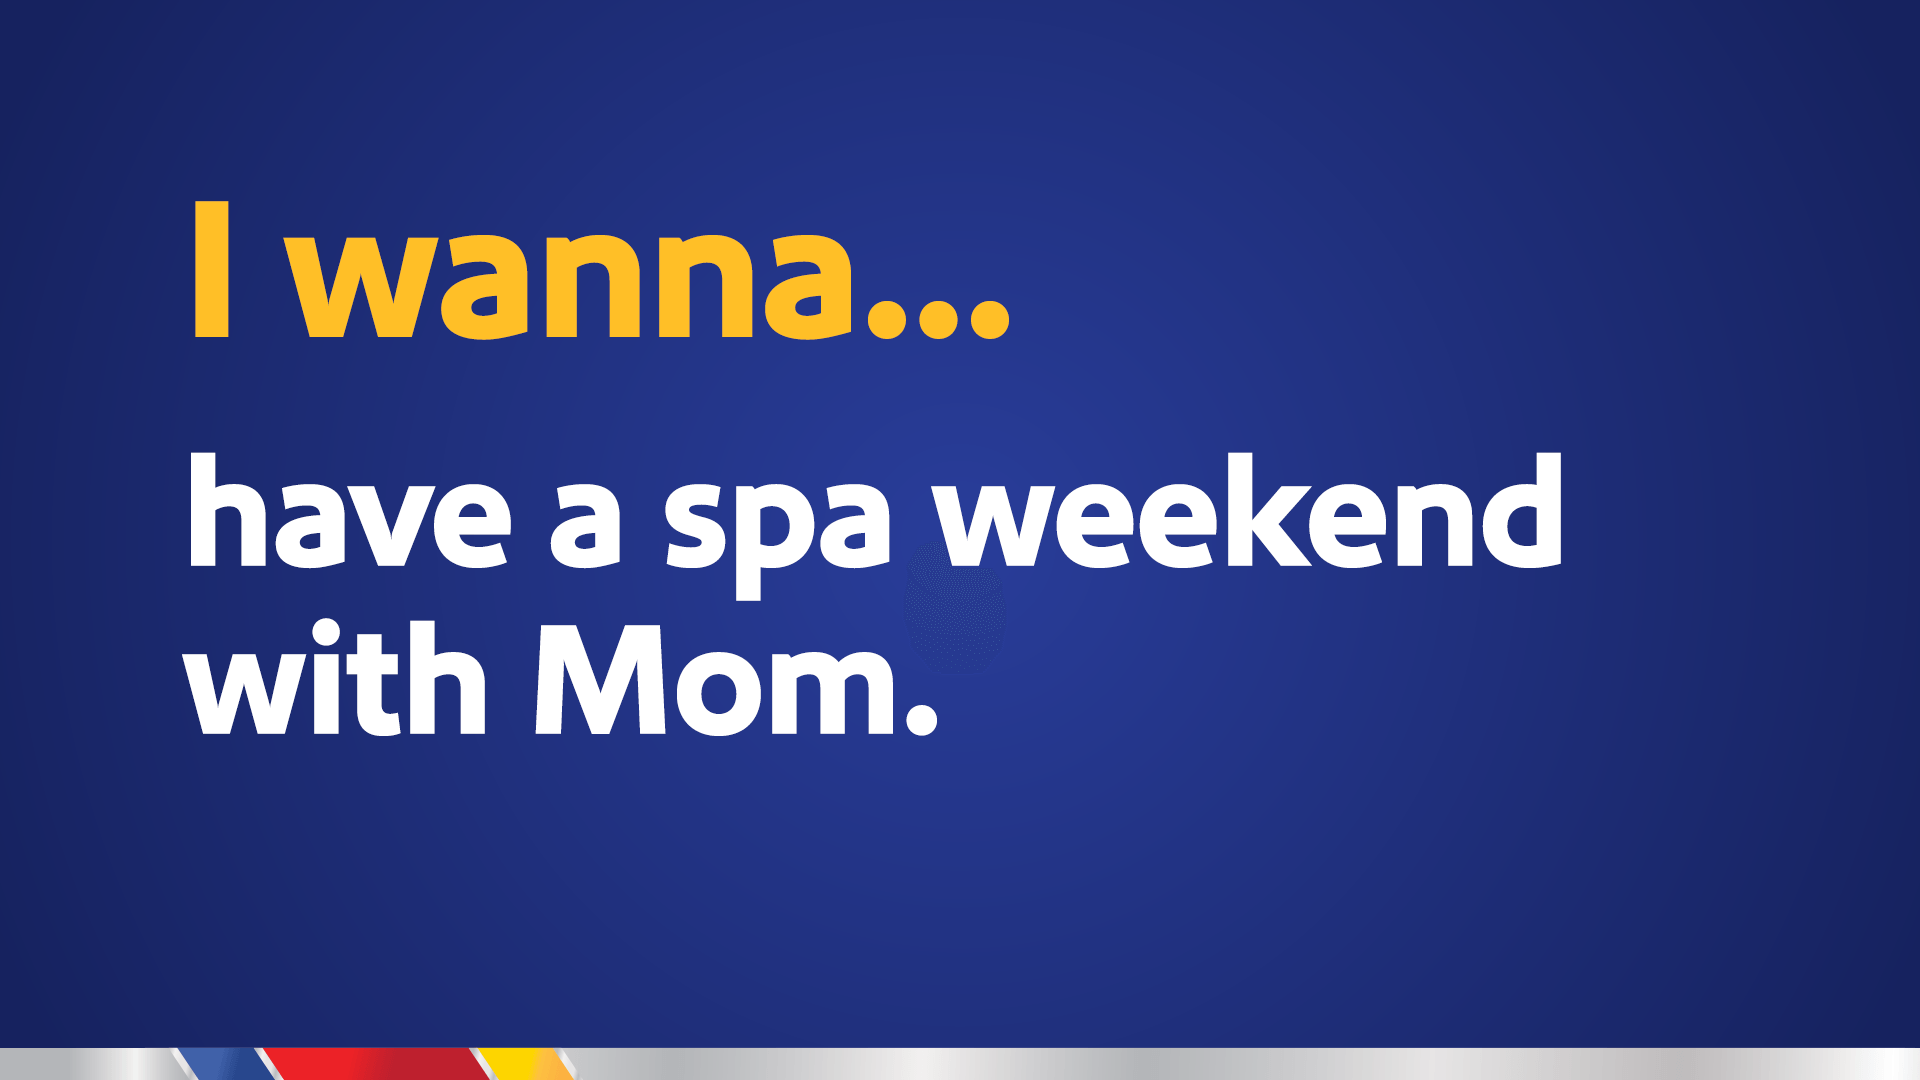 I wanna… have a spa weekend with Mom.